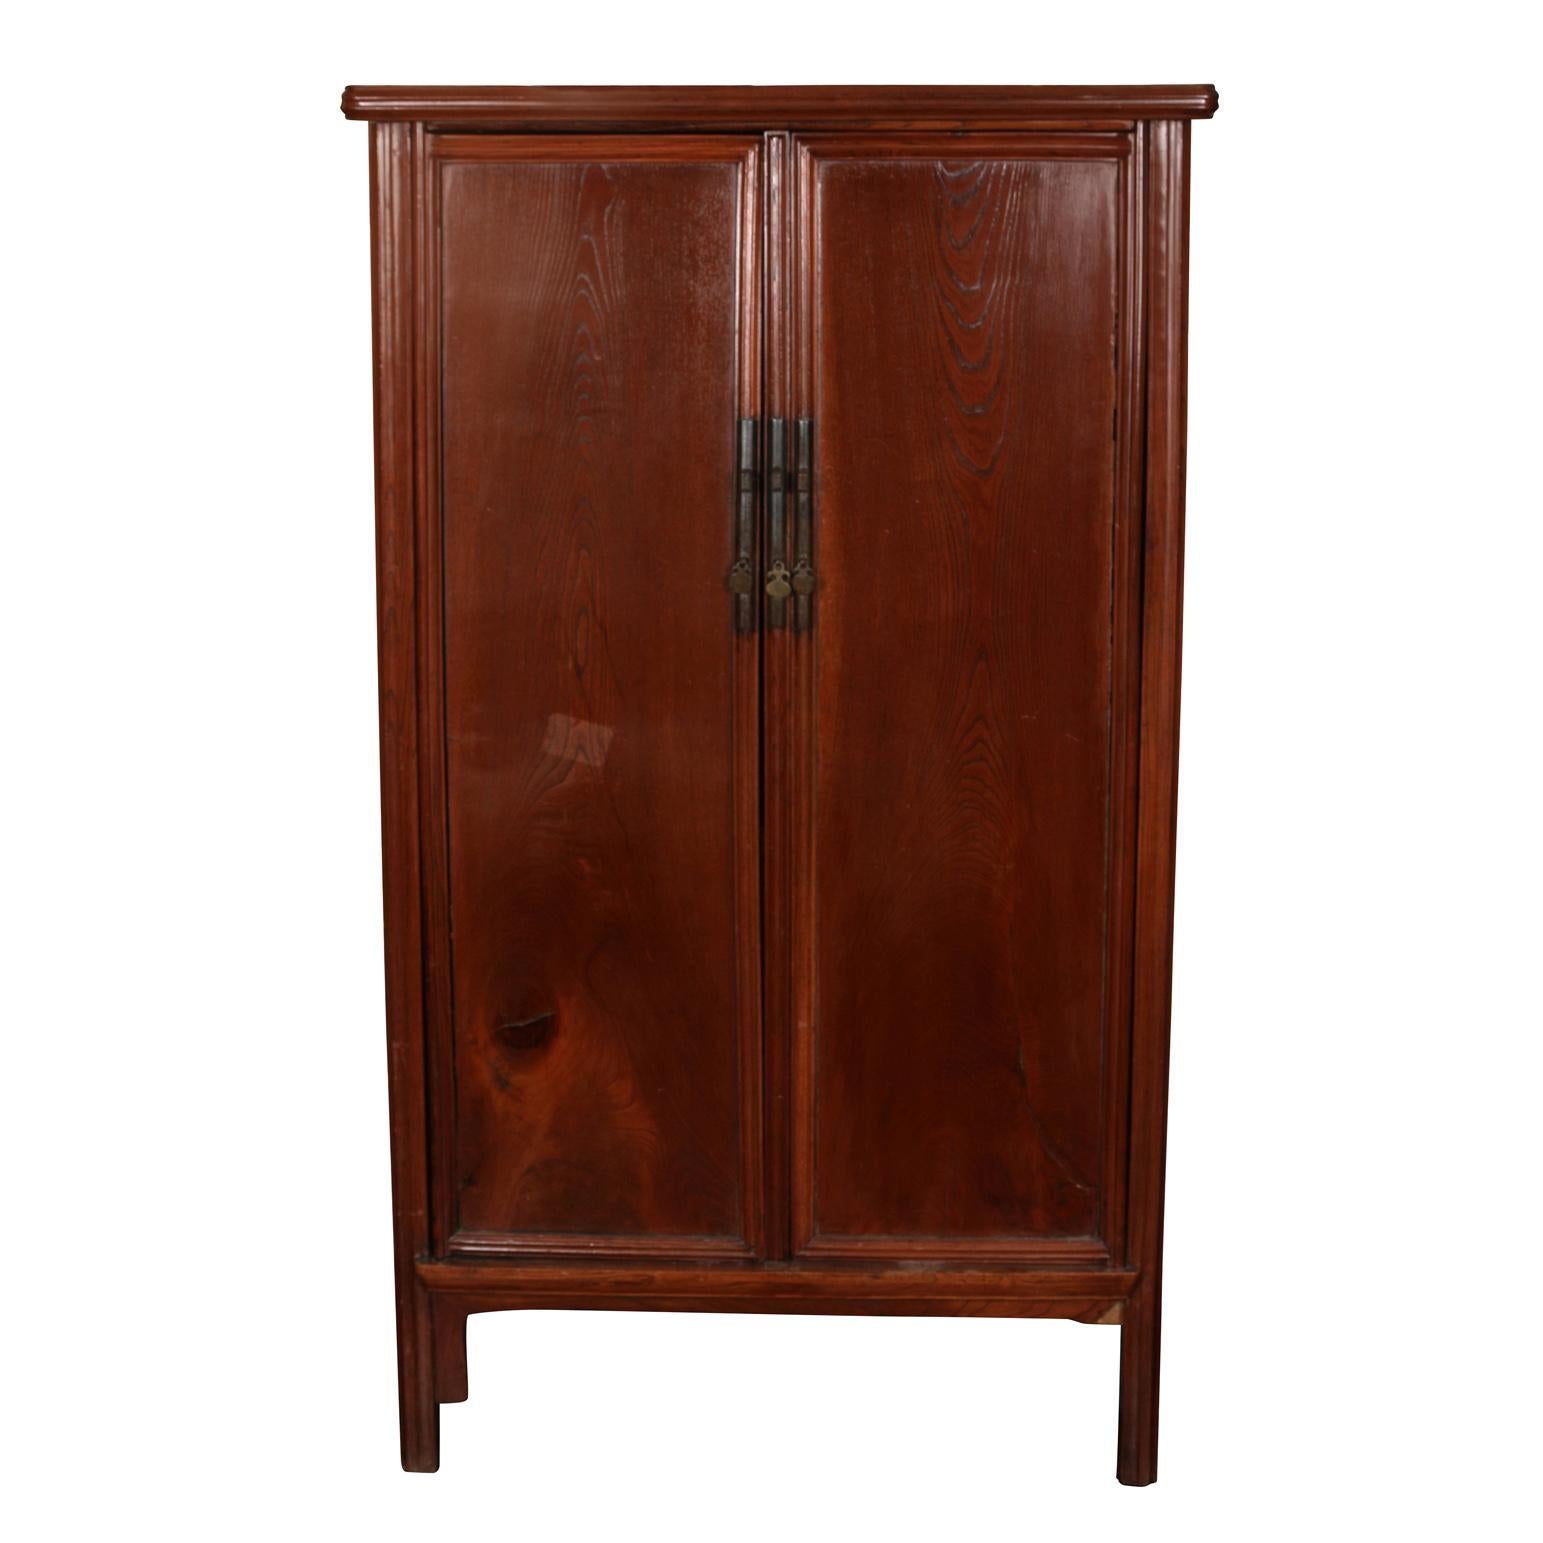 Large Asian rosewood TV cabinet with two doors.